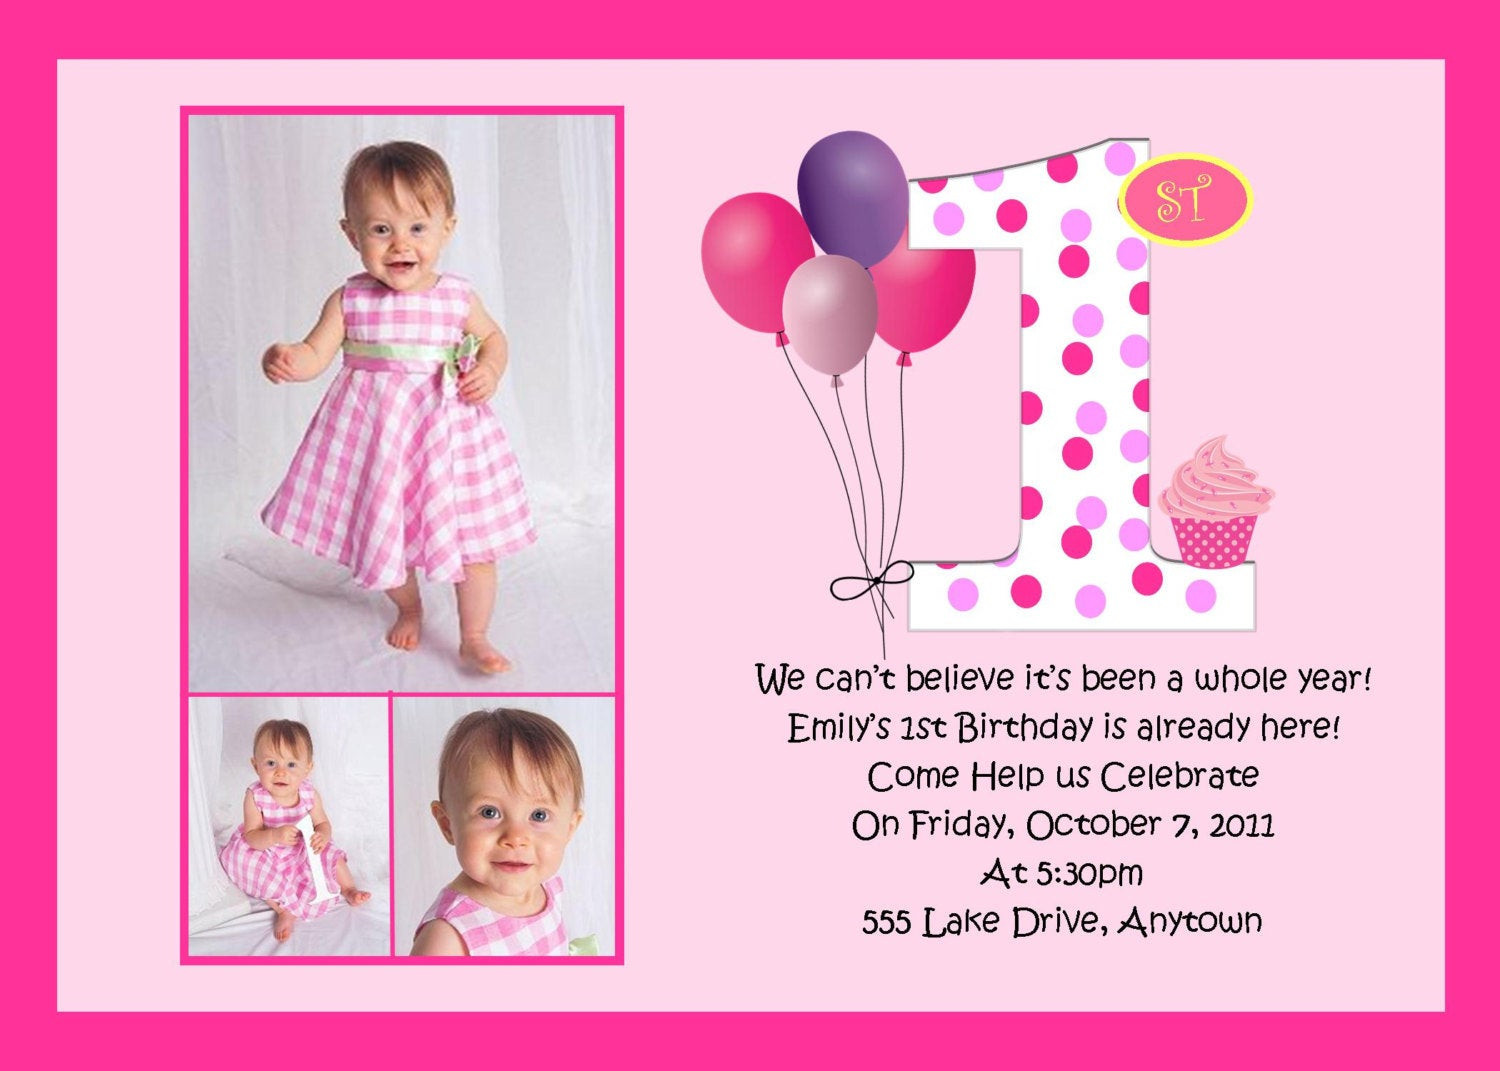 Birthday Invitations Quotes
 Quotes For 1st Birthday Invitations QuotesGram